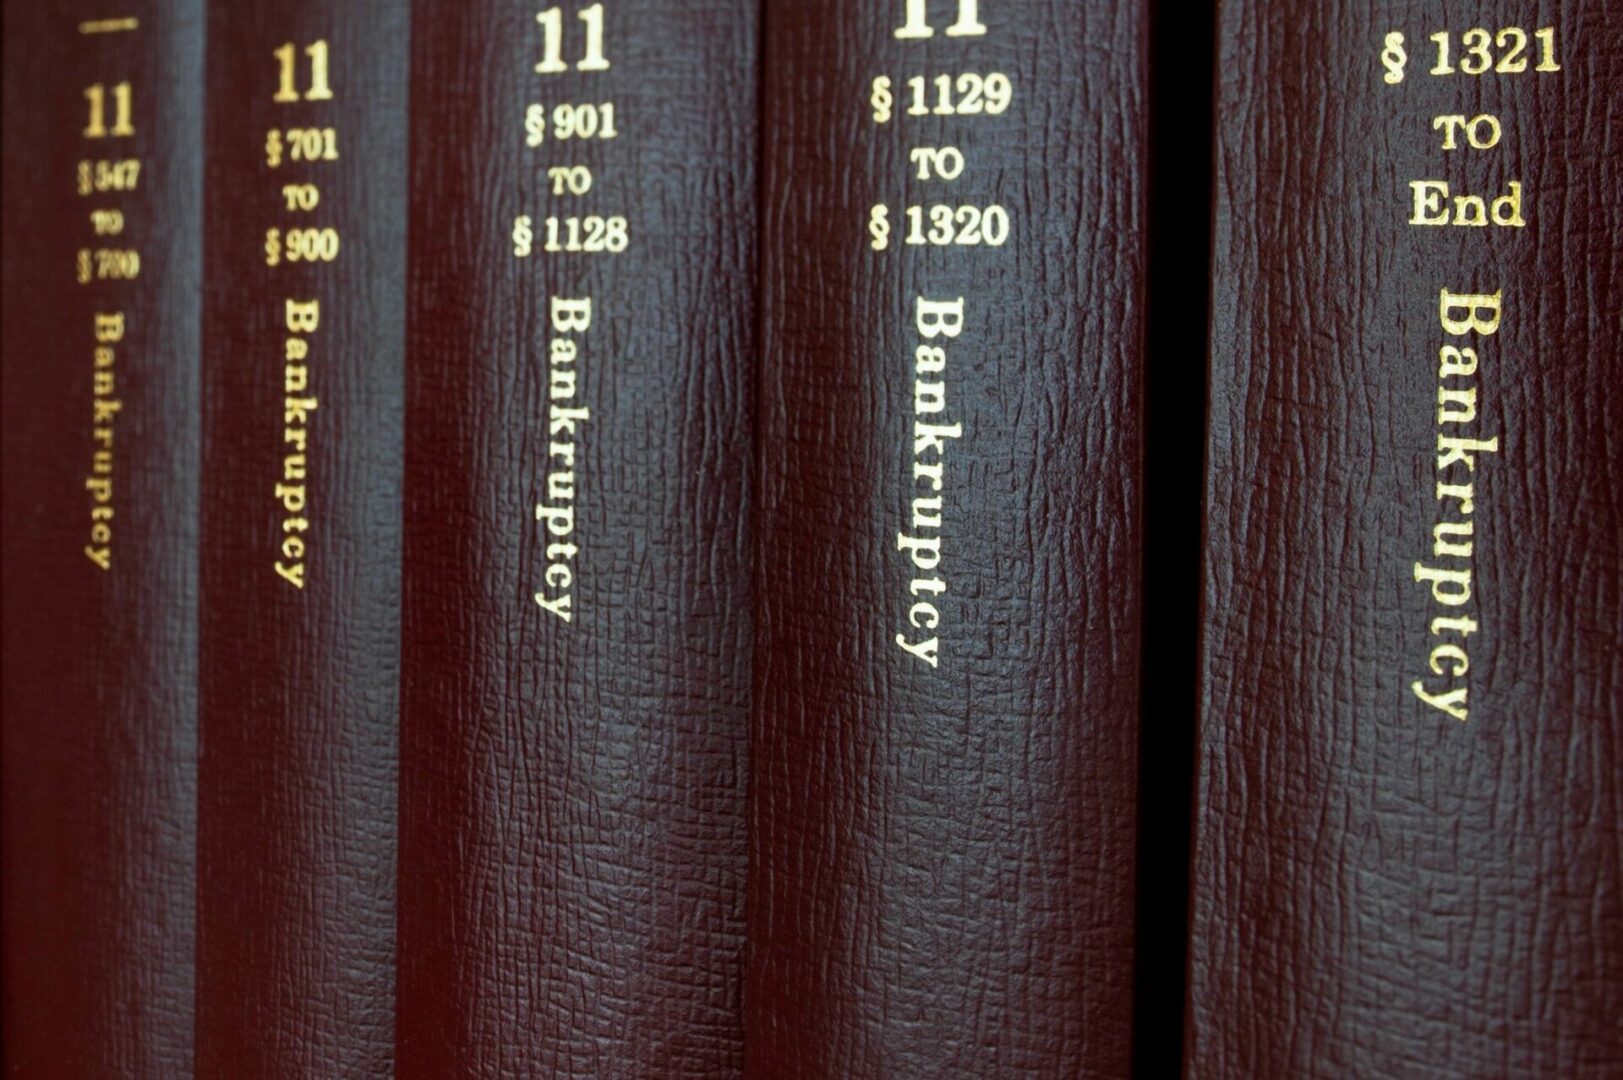 A close up of several books on bankruptcy